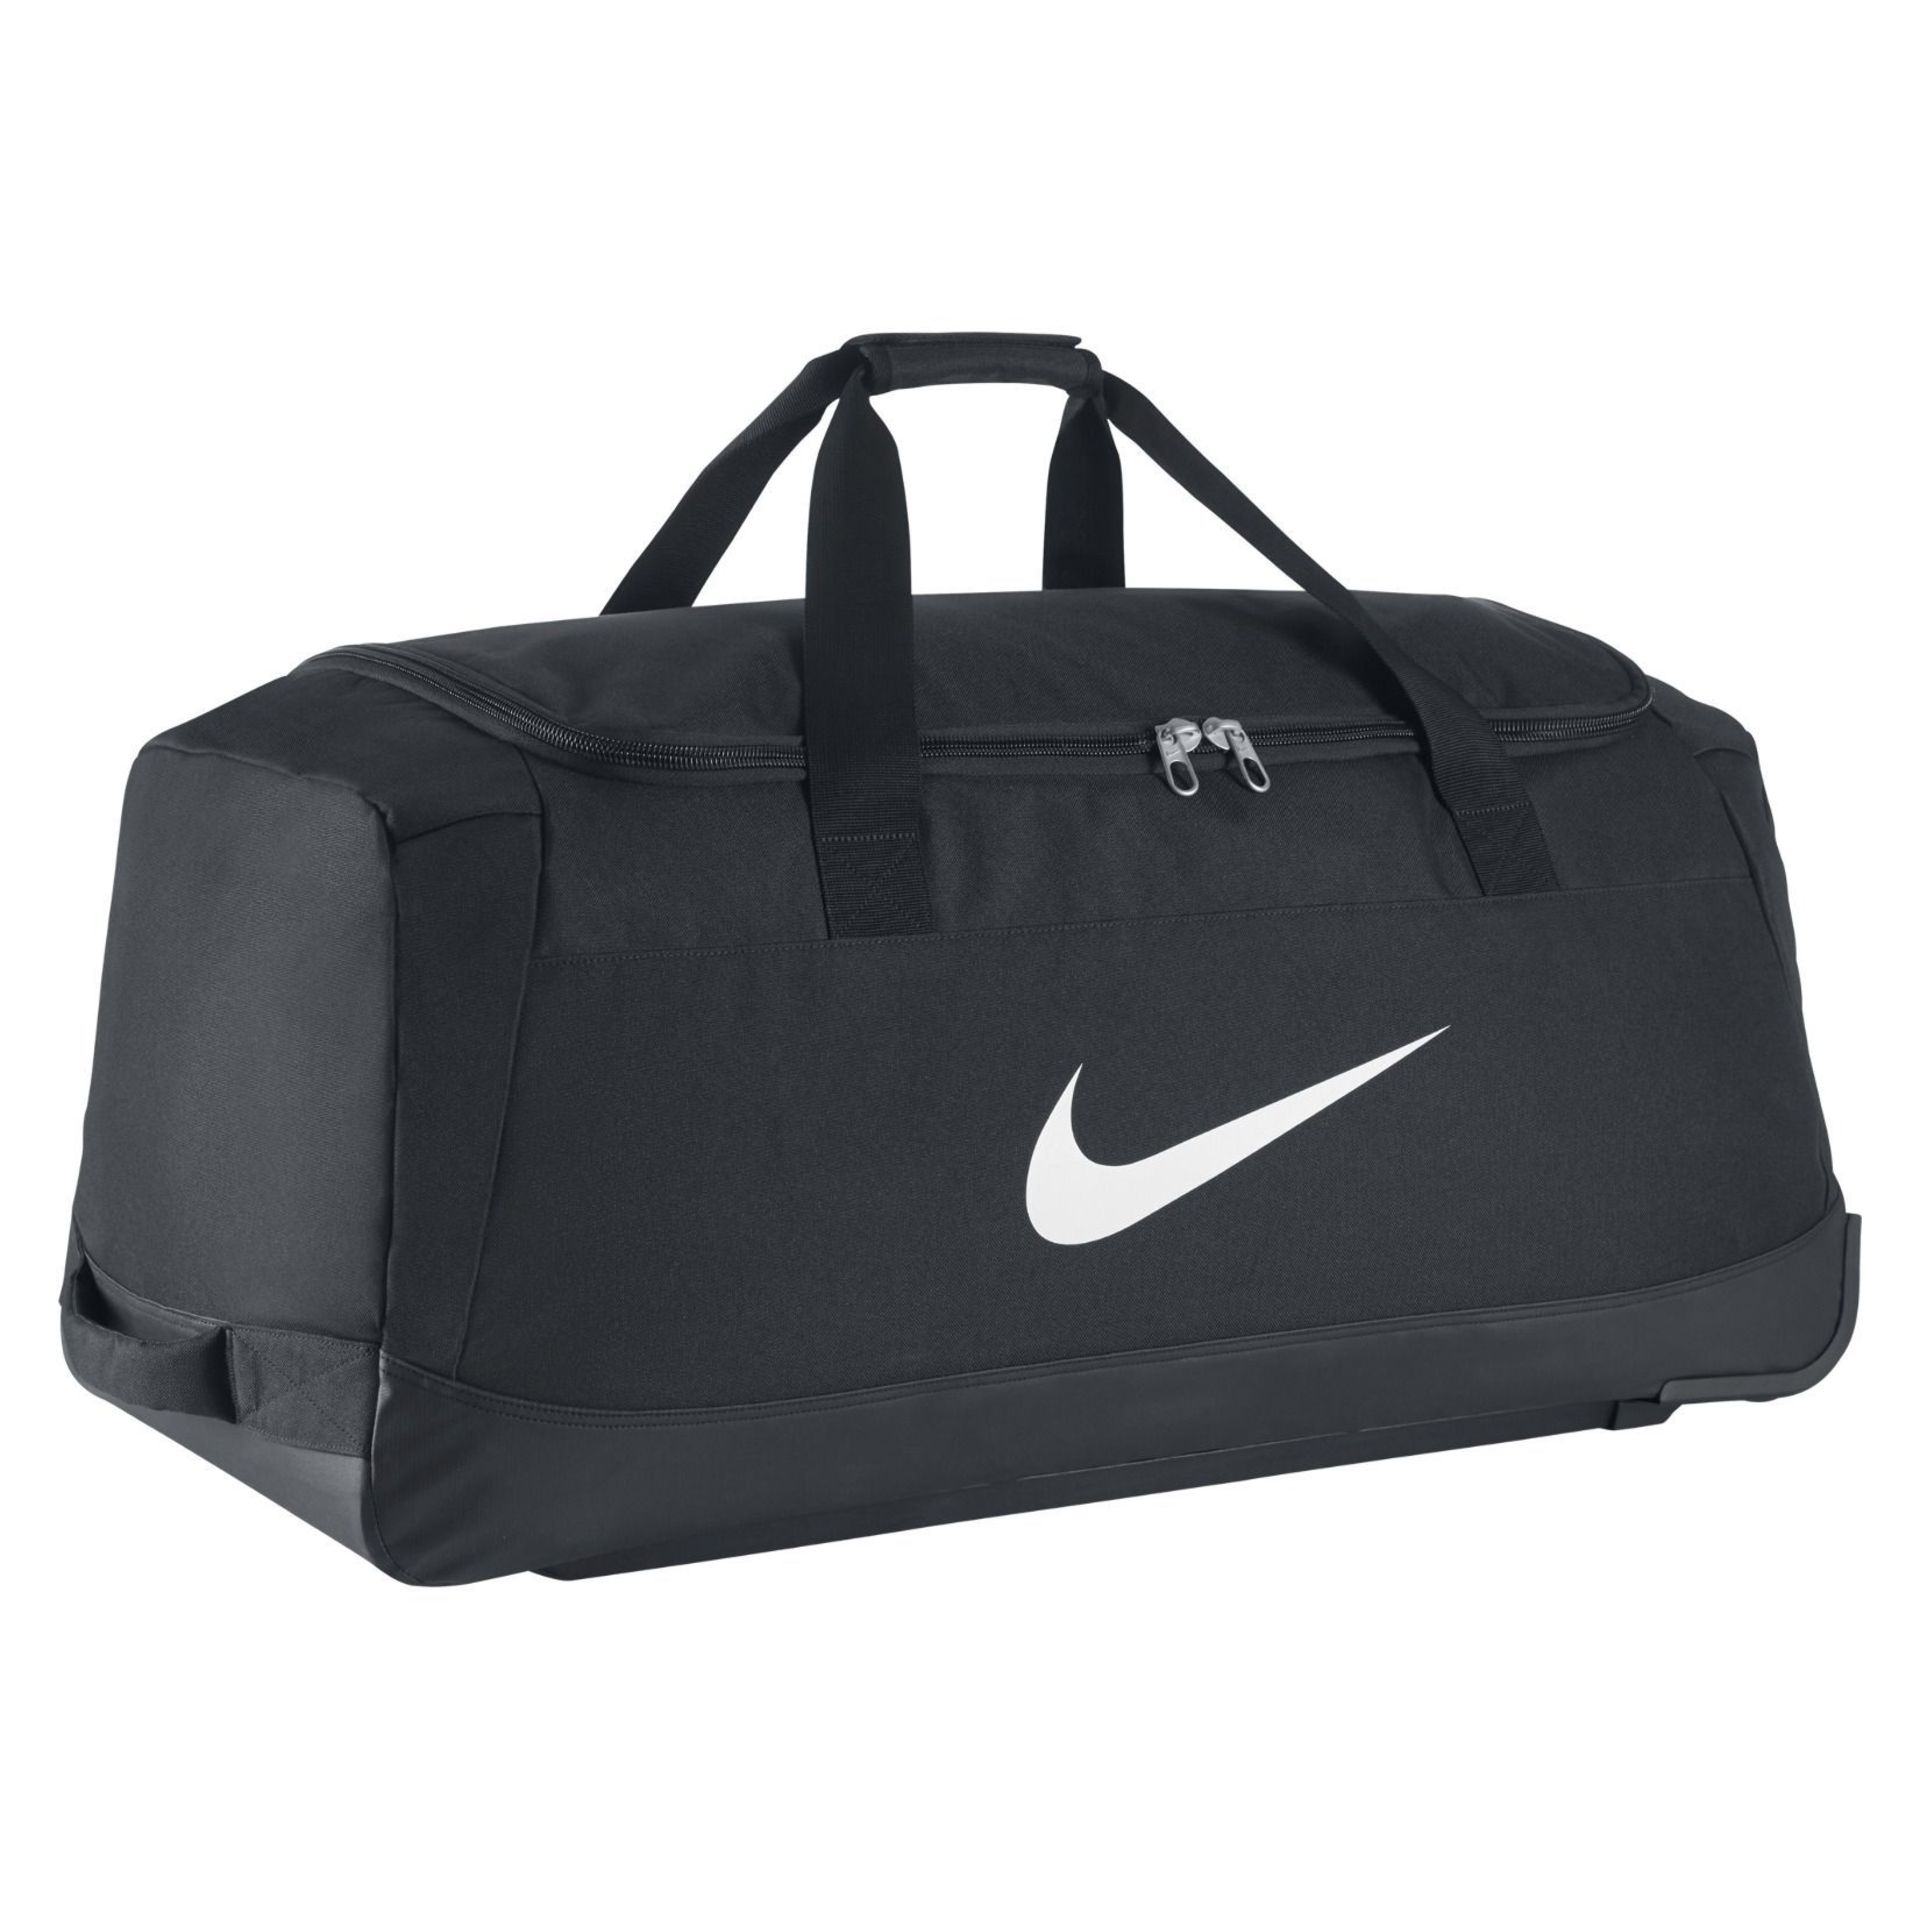 NIKE CLUB TEAM ROLLER BAG. - R14.12. A spacious bag with separate shoe compartment - Adjustable, - Image 2 of 2